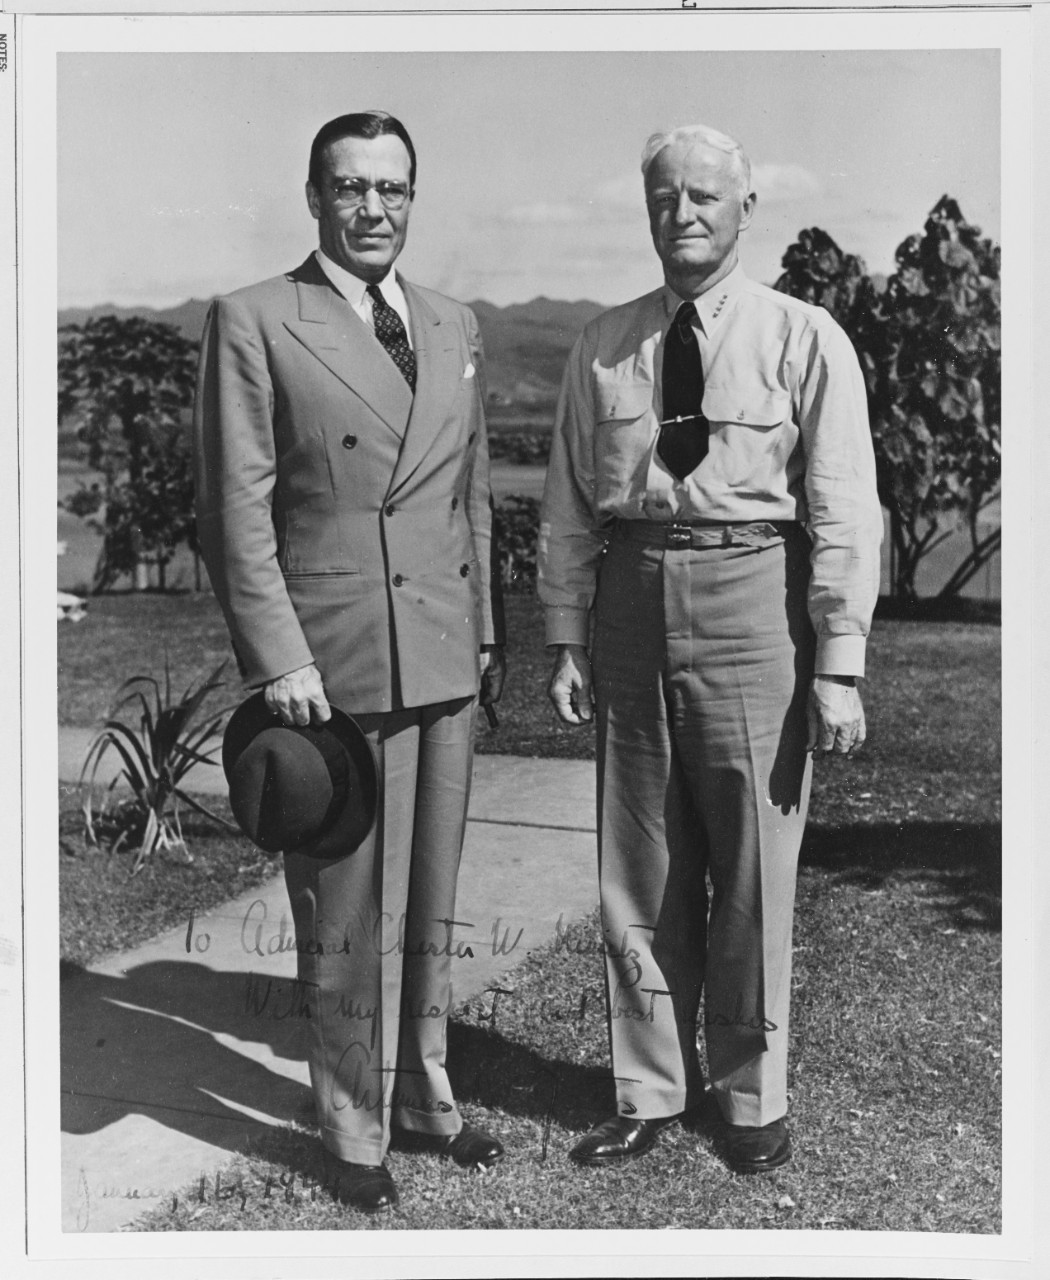 Autographed photo of Fleet Admiral Nimitz with Assistant Secretary of Navy (Air) Gates